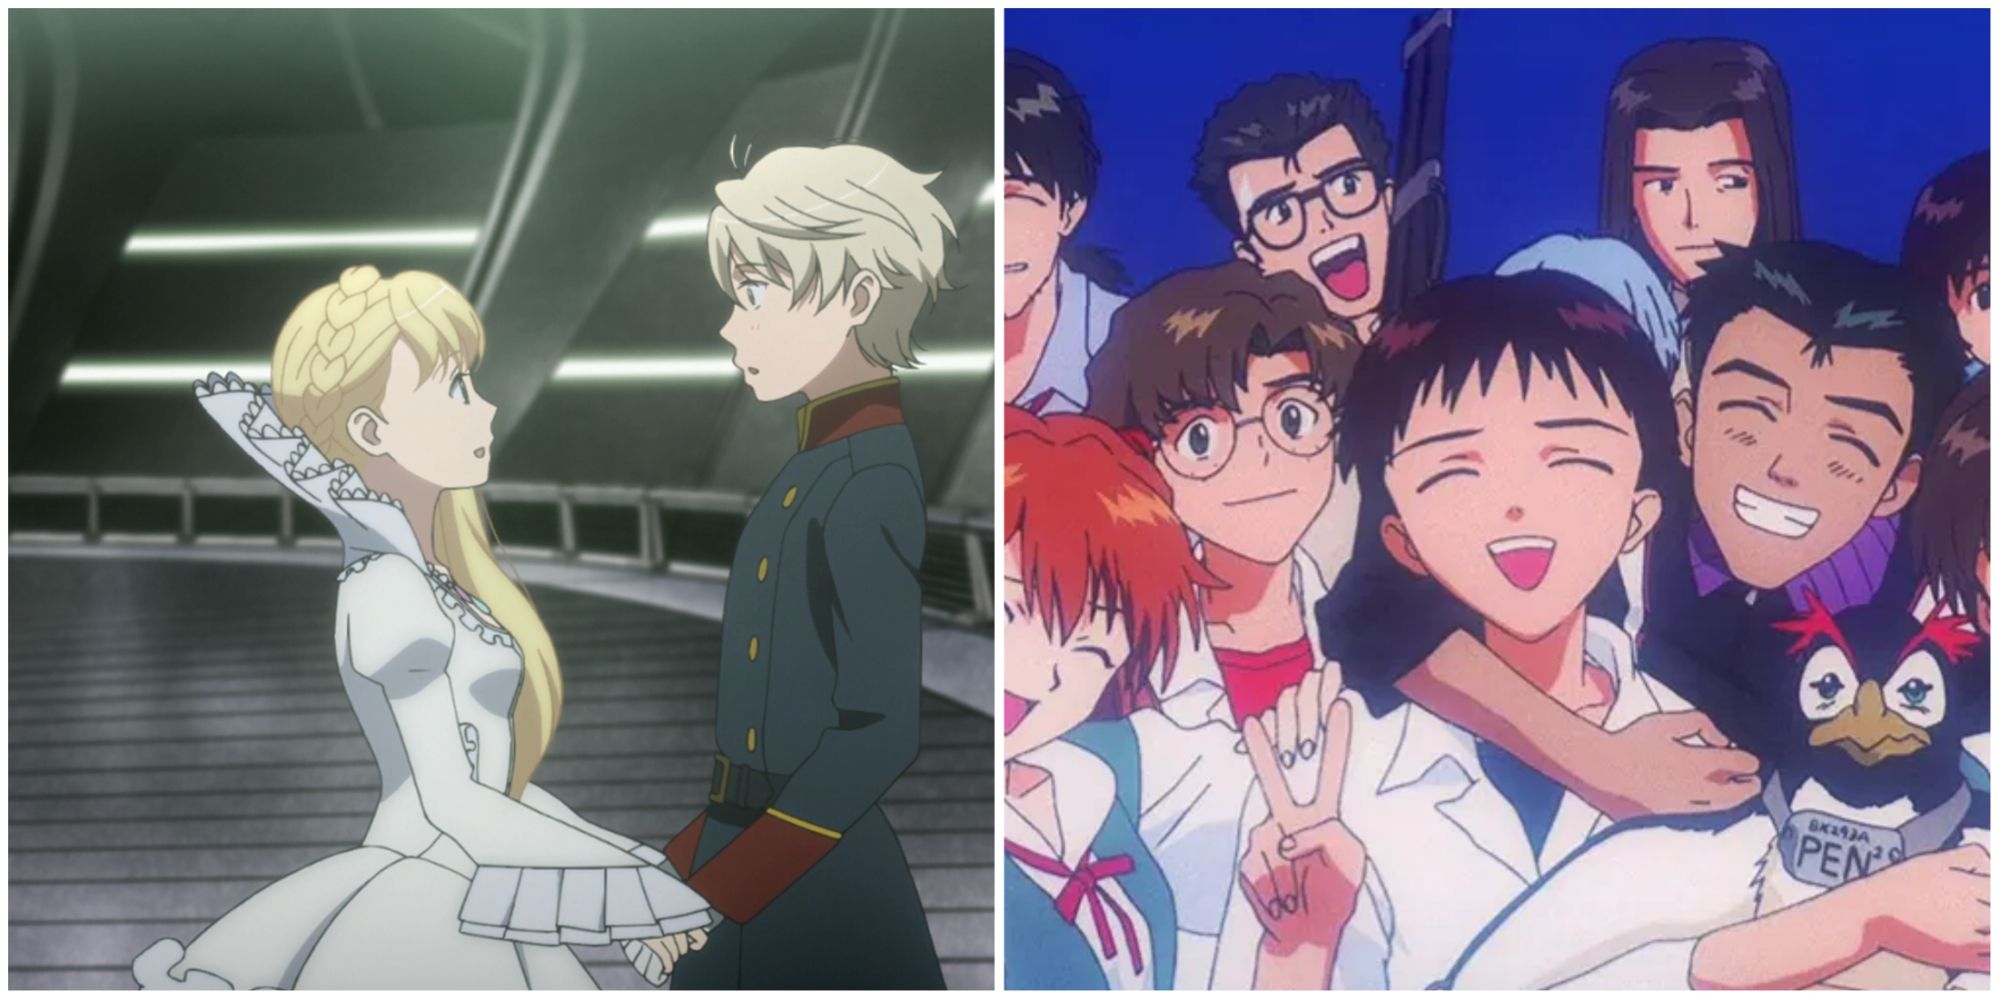 A split image featuring characters from Aldnoah Zero and Neon Genesis Evangelion